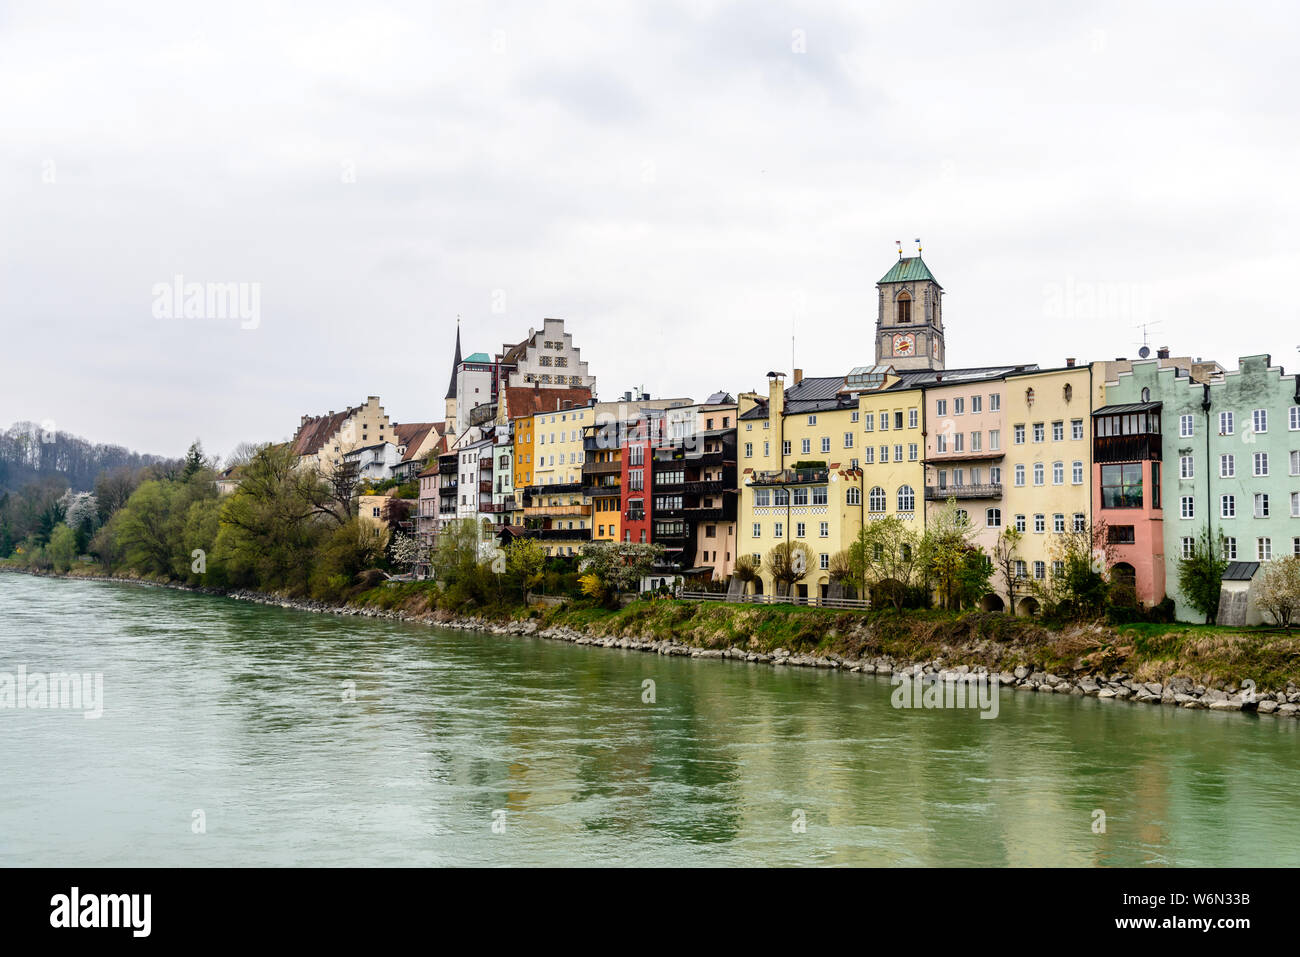 Wasserburg am Inn, Bavaria, Germany. View on old town, colorful buildings, houses with a river. Stock Photo